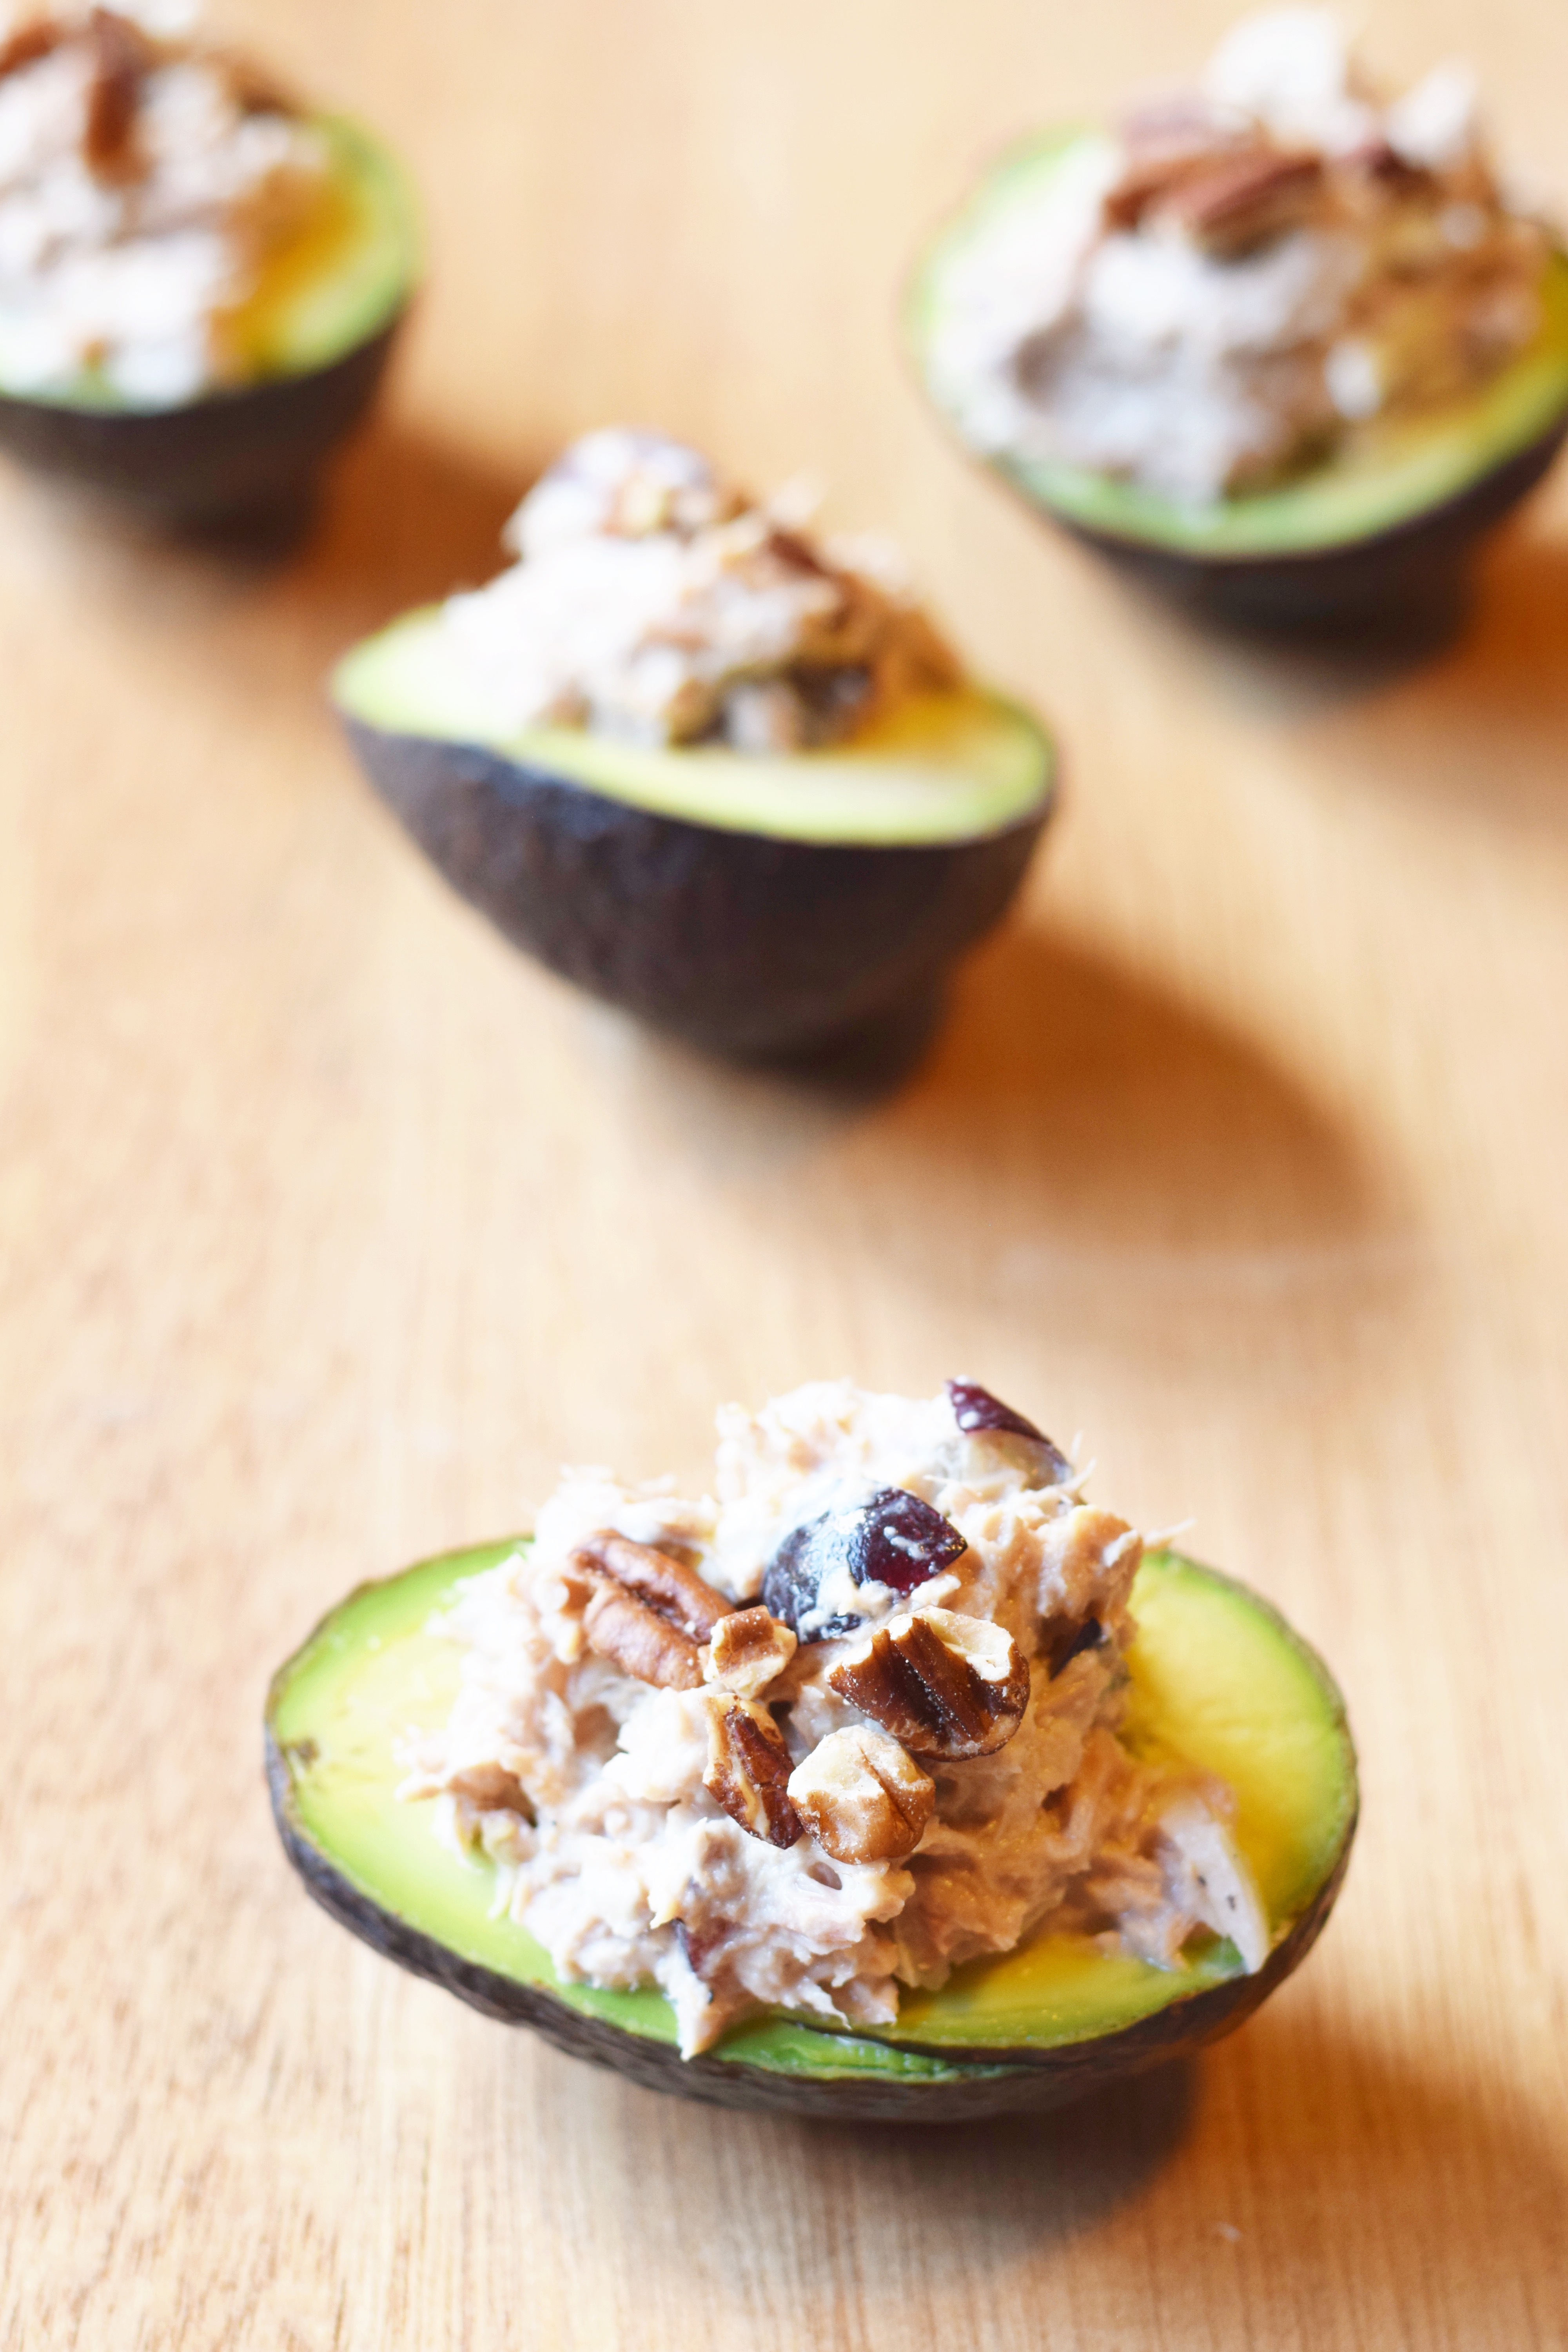 Avocado Tuna Boats - Whole30 Compliant Dinners - Dinner Ideas Whole30 - Clean Eating Recipe - Quick and Easy Dinner Ideas - Communikait by Kait Hanson